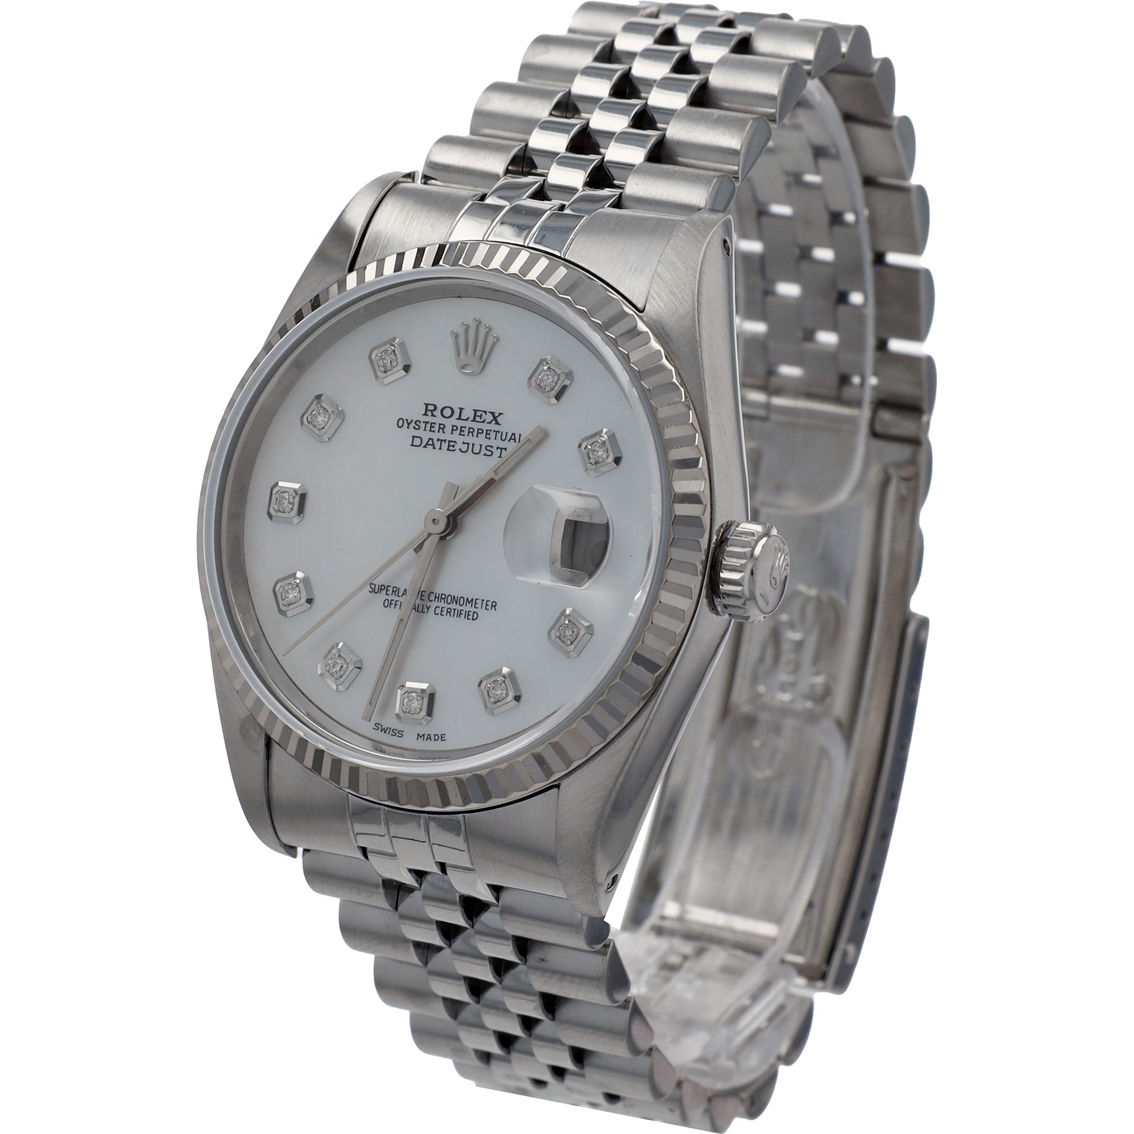 Rolex Men's Datejust Watch (Pre-Owned) - Image 3 of 5